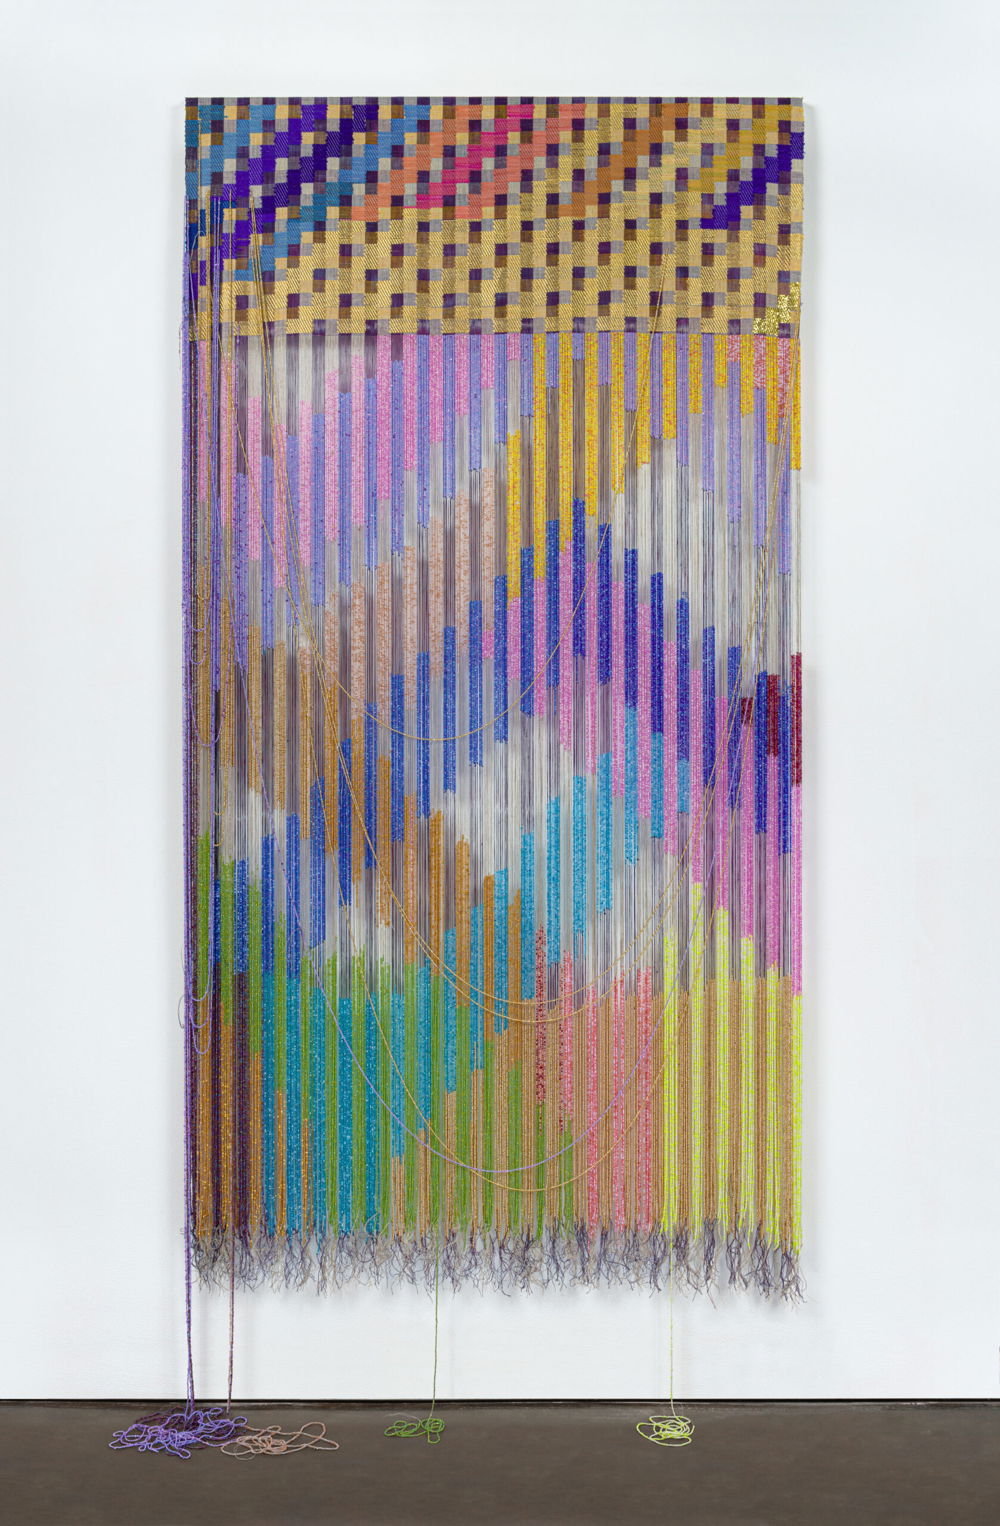 A vertical rectangular-shaped tapestry. The top quarter of the composition is a completed tapestry composed of grid pattern in warm purples and taupes overlaid with a stepped diagonal pattern brocaded in light blues, deep purples, warm oranges, pinks, and golds. The bottom three quarters of the composition are unwoven with intricately beaded strands of thread that create a vibrating pattern of intersecting chevrons in yellows, golds, ochres, blues, greens, and purples. A few loose strands are wisped upward creating thin U-shaped lines. Additional loose strands dangle downward to puddle onto the floor.